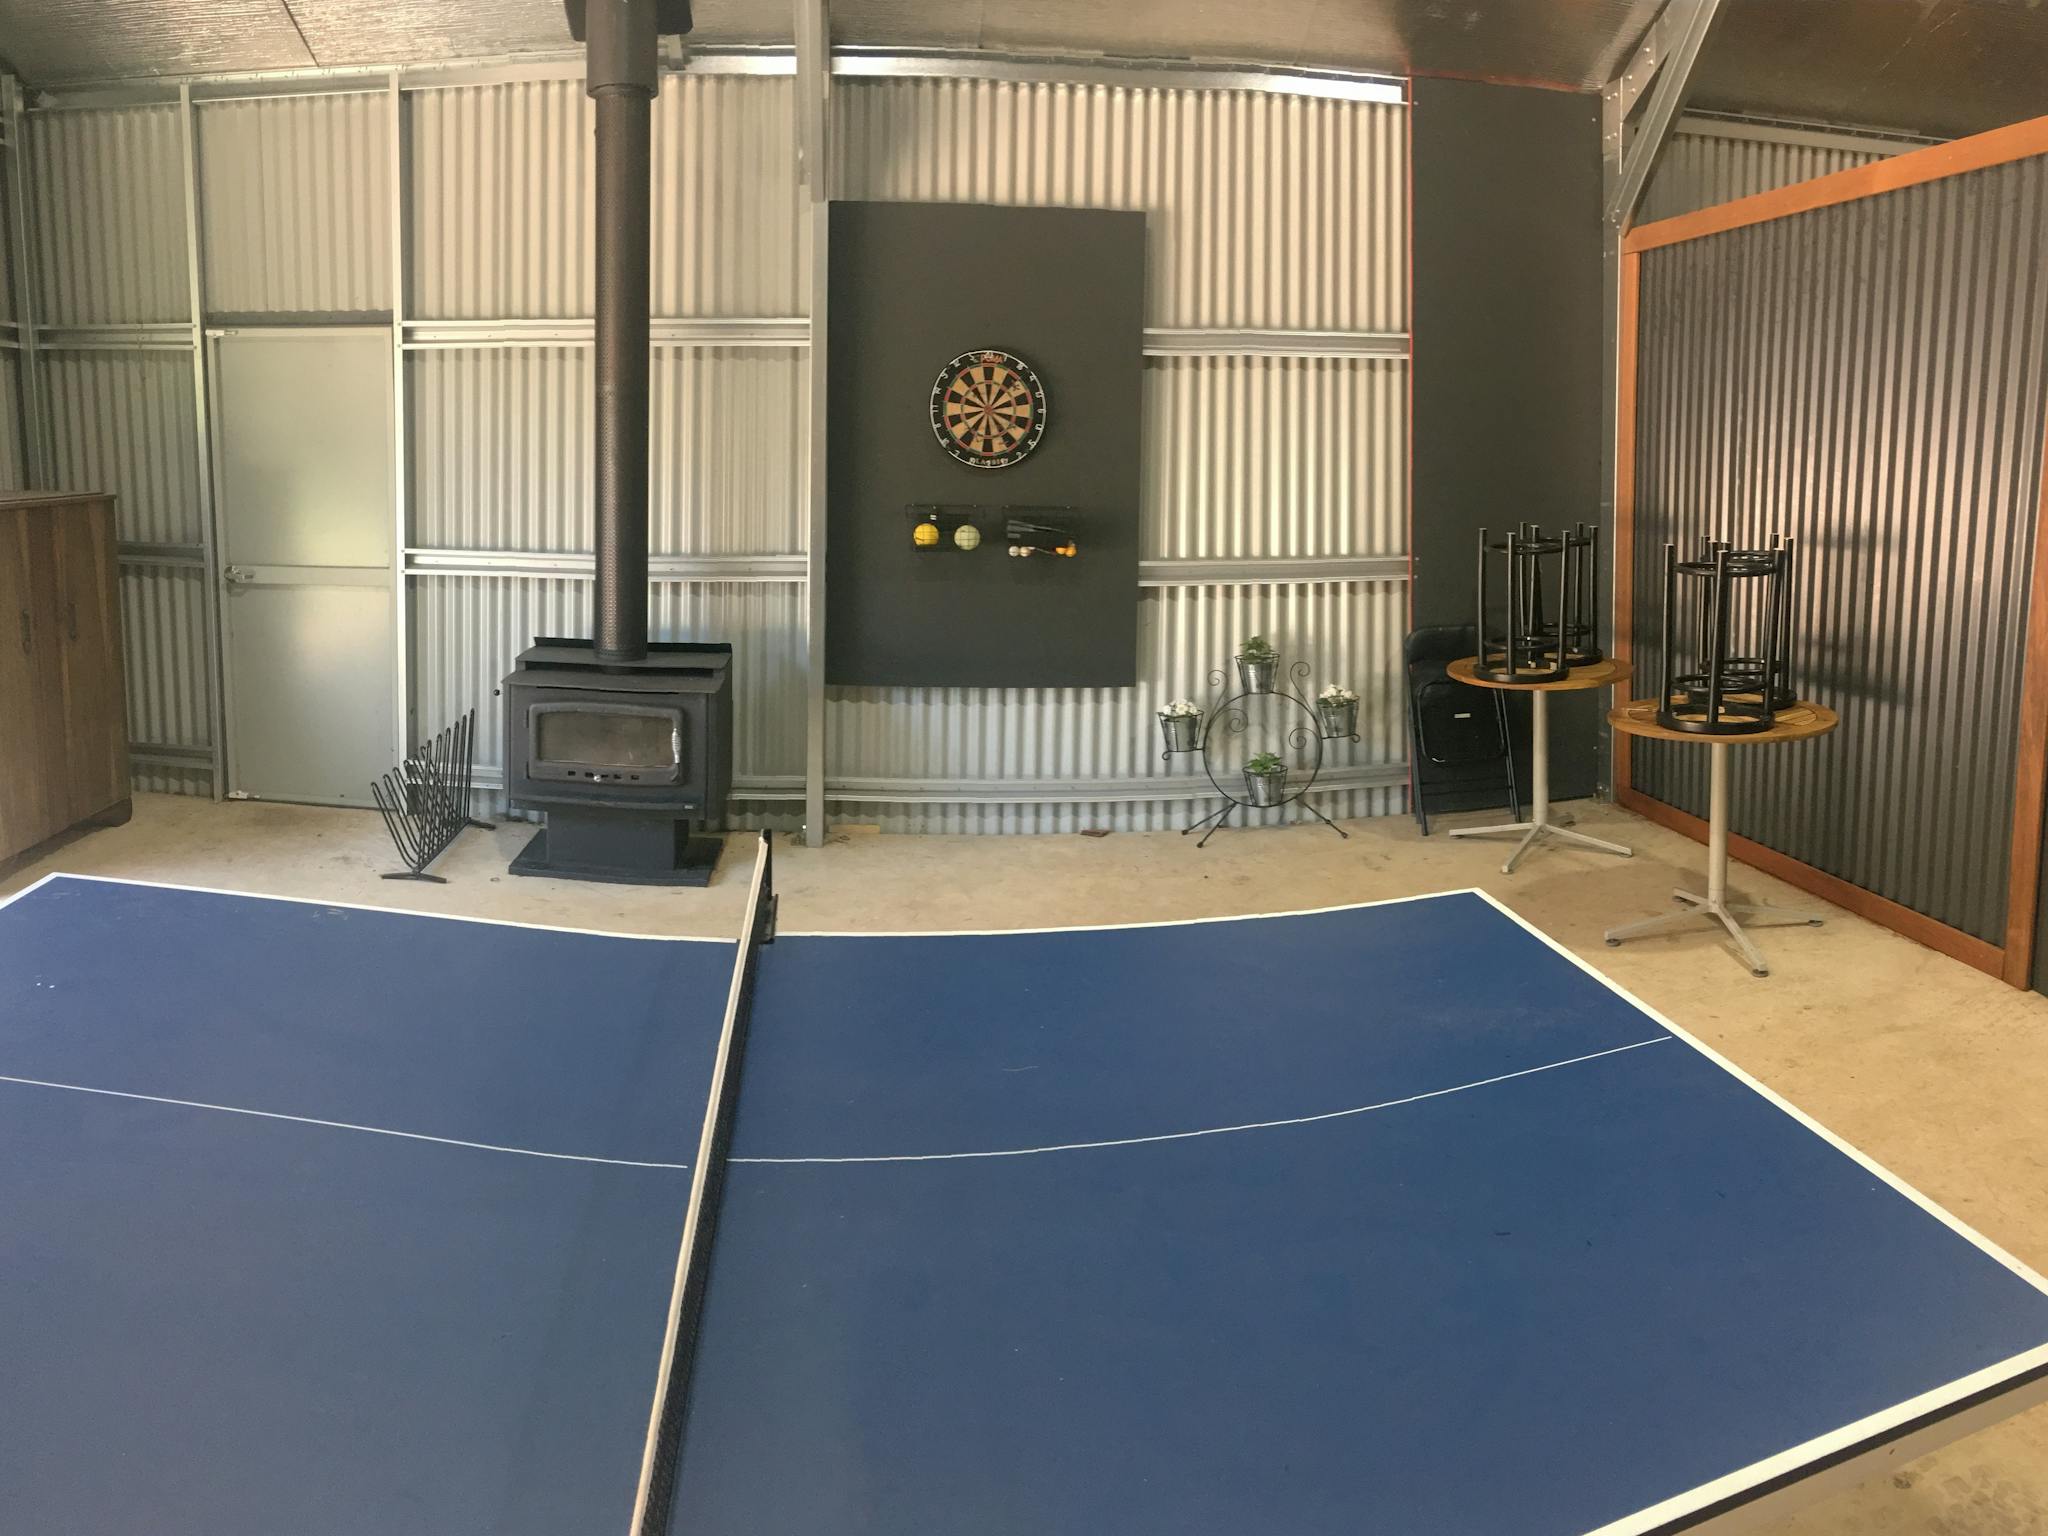 Shed / games room